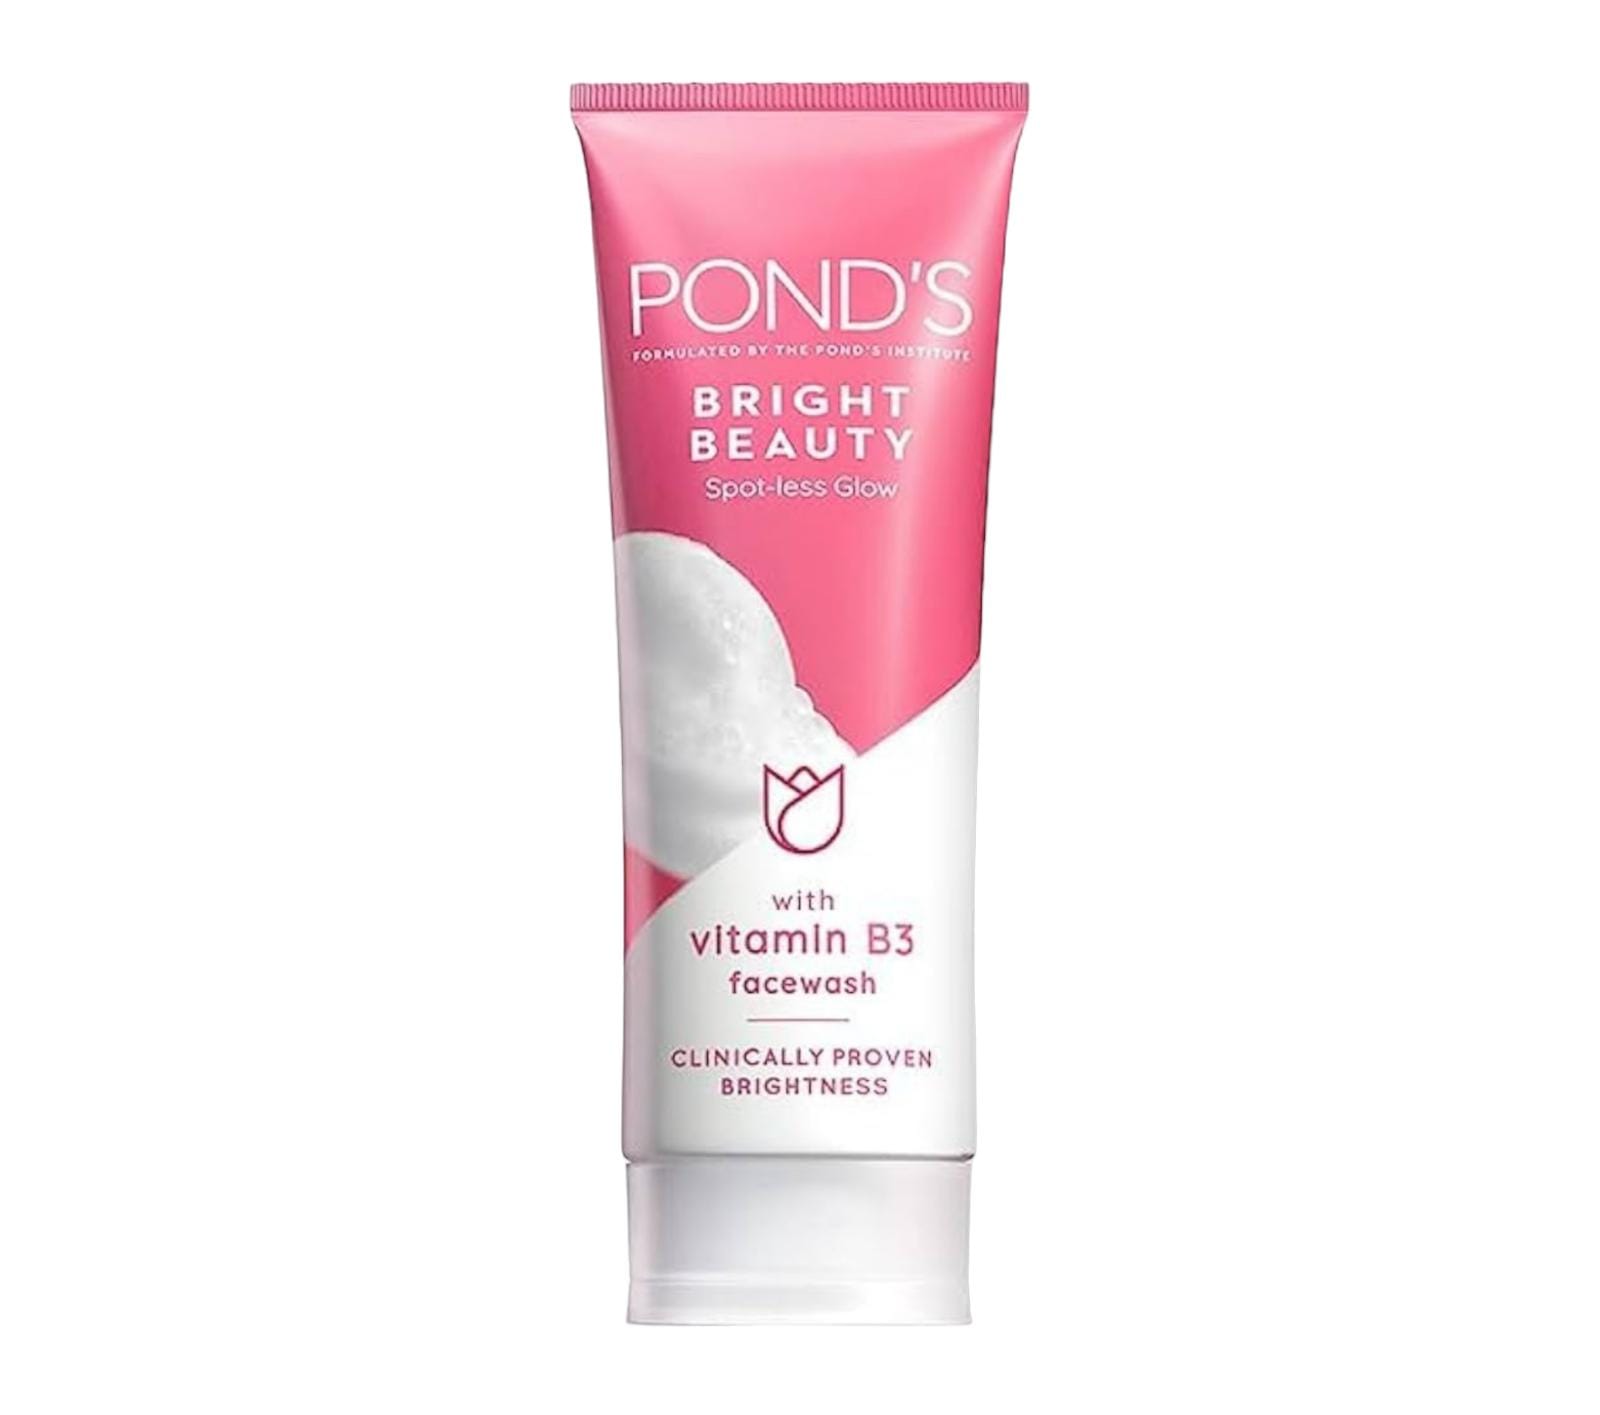 Ponds Bright Beauty Face wash